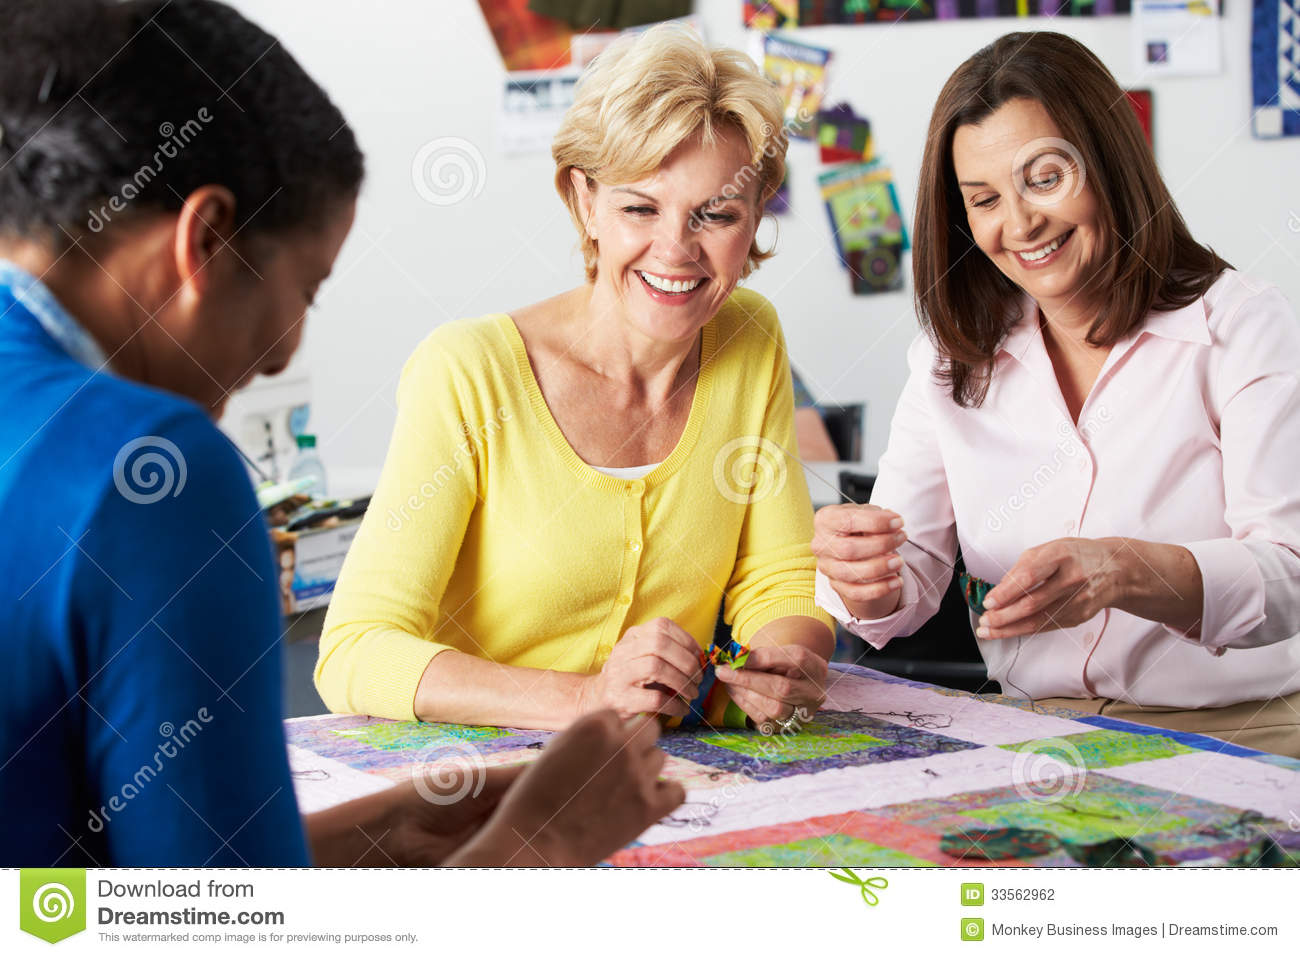 Group Of Women Making Quilt Together Stock Photography   Image